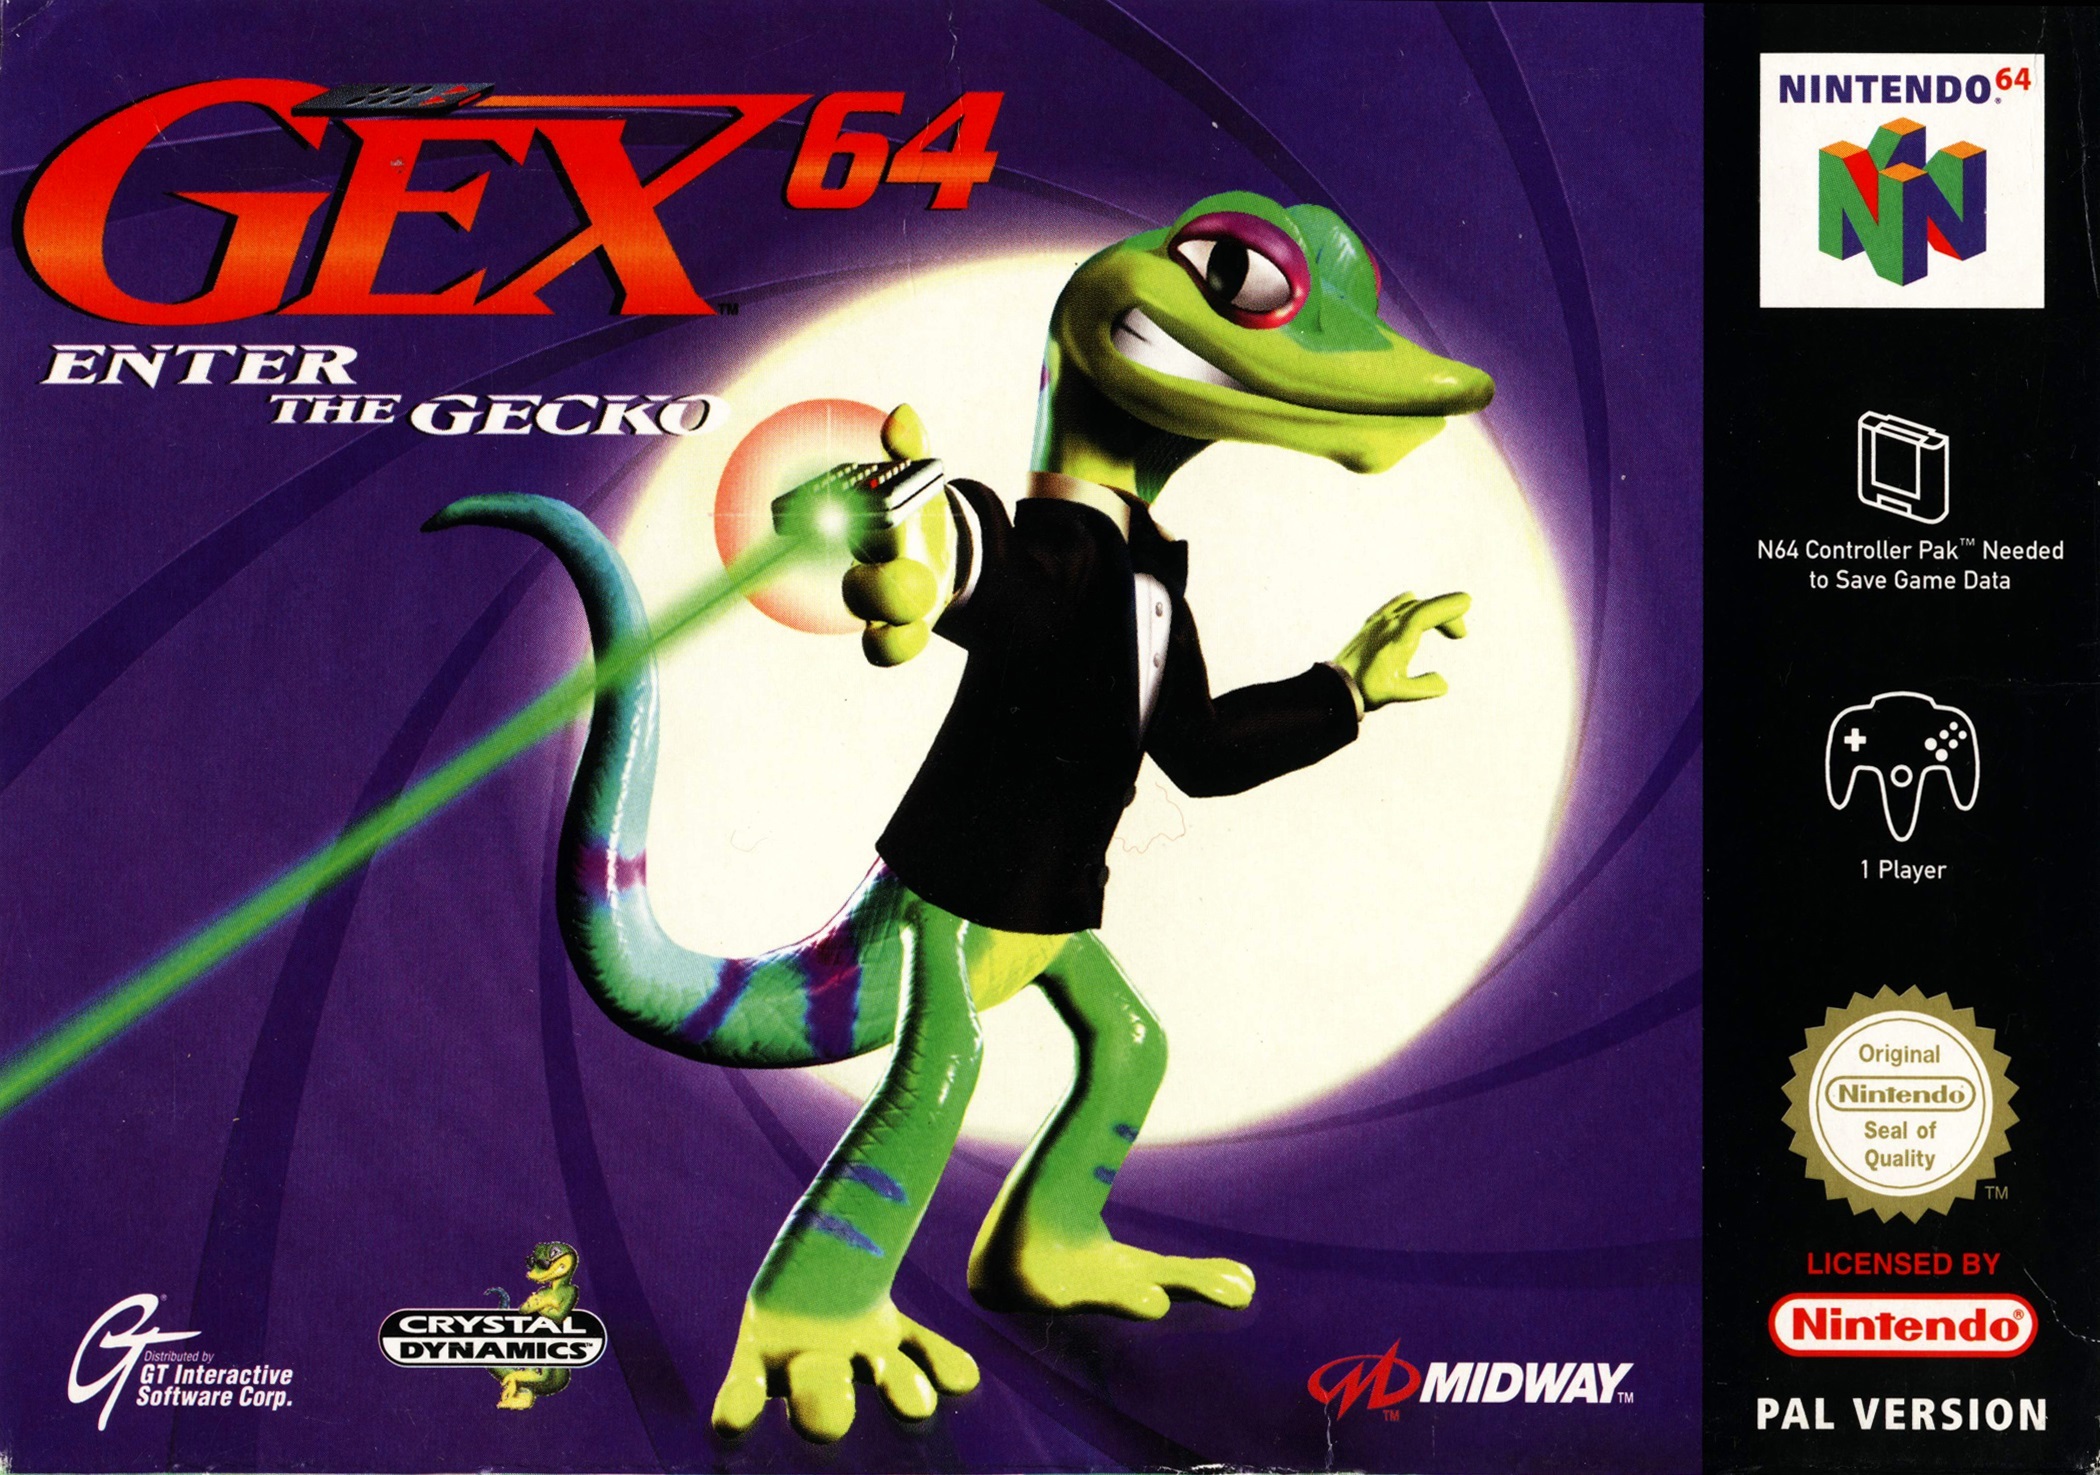 forgotten franchise mascots - gex 64 enter the gecko n64 - Nintendo 64 Gex 64 Enter The Gecko Eck N64 Controller PakNeeded to Save Game Data Coming 1 Player Original Nintende Seal of Quality Crystal Dynamics Licensed Ay Nintendo Pal Version Gt Interactive